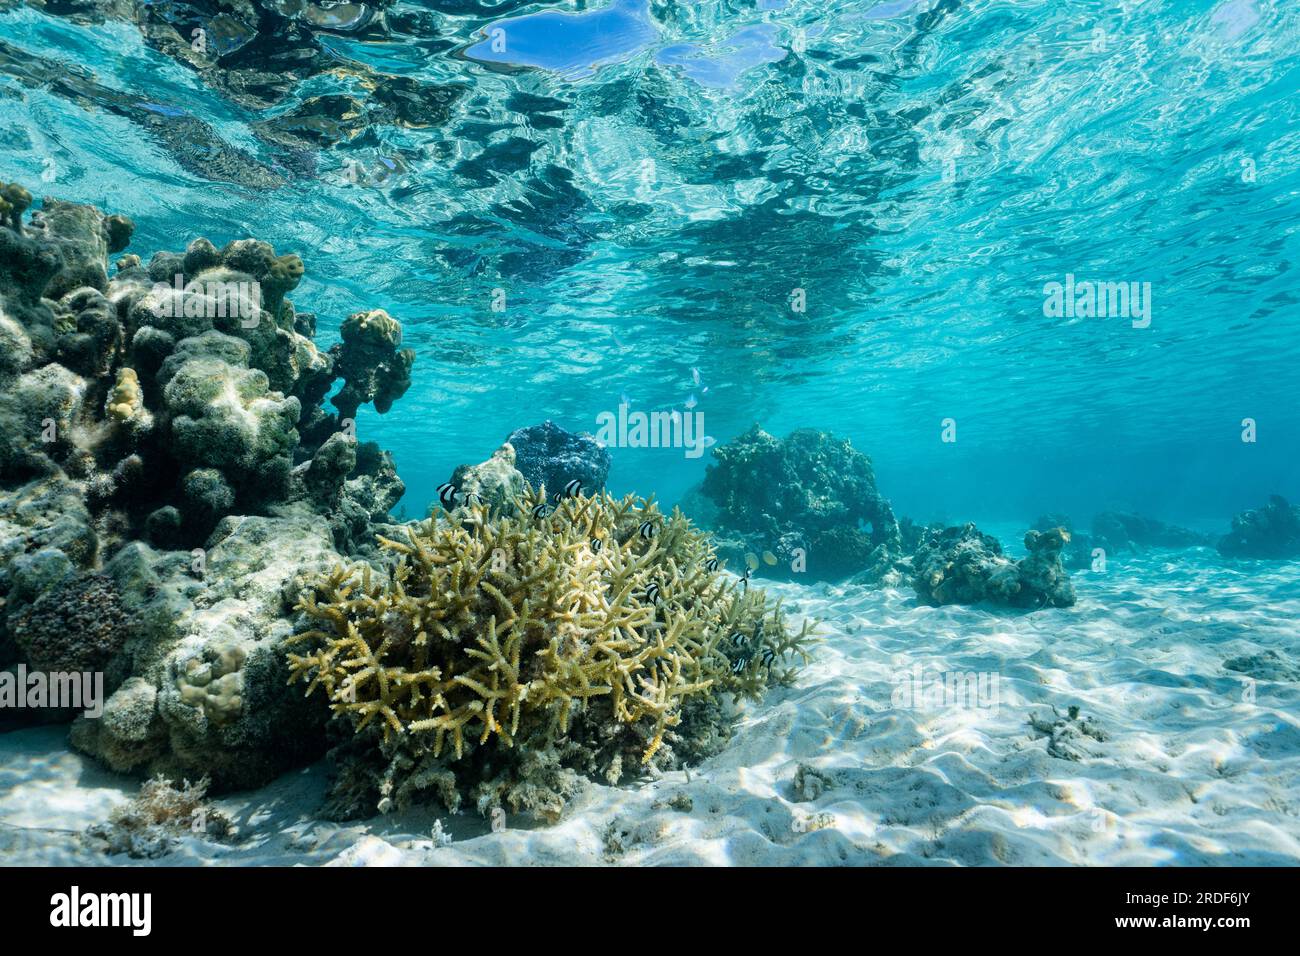 Underwater picture of pacific ocean french polynesia Stock Photo